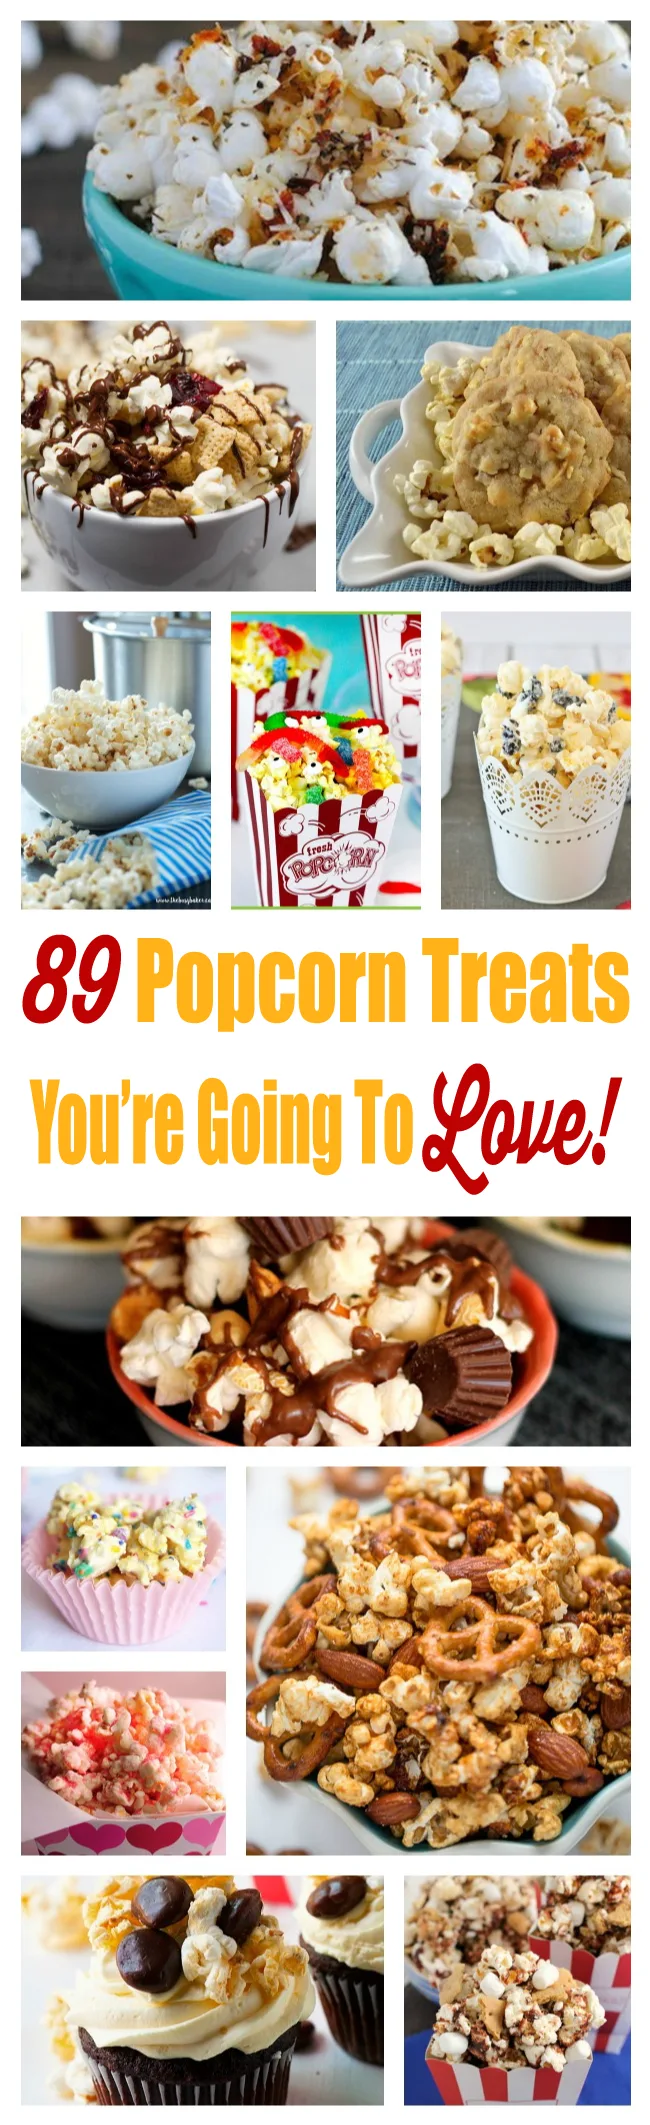 Take this budget friendly treat to the next level with these 89 delish recipes to rock. Get popcorn recipes galore.